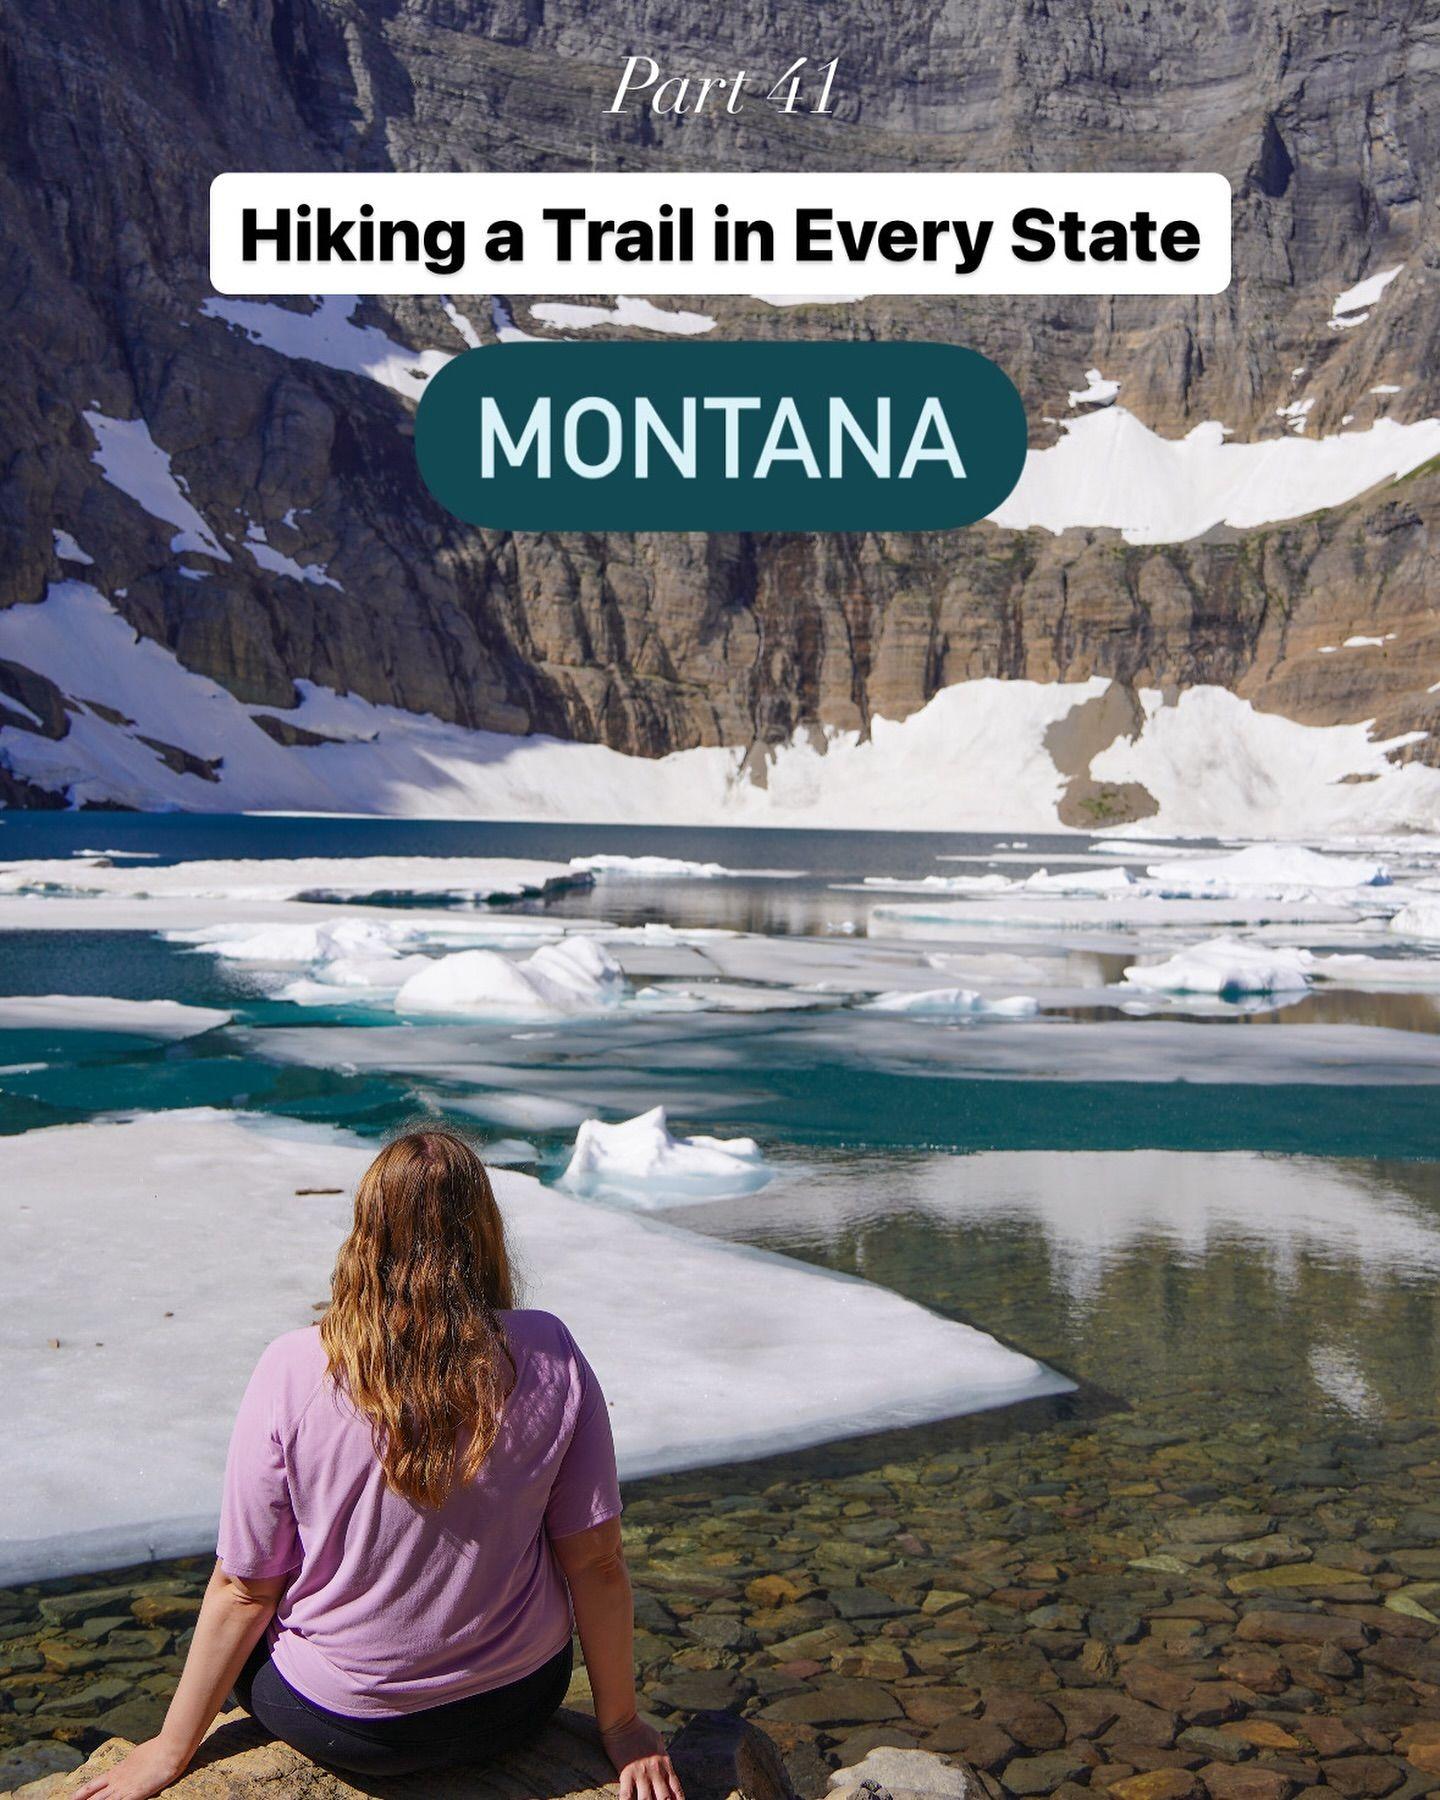 A hike in all 50 states: part 41 - Montana!